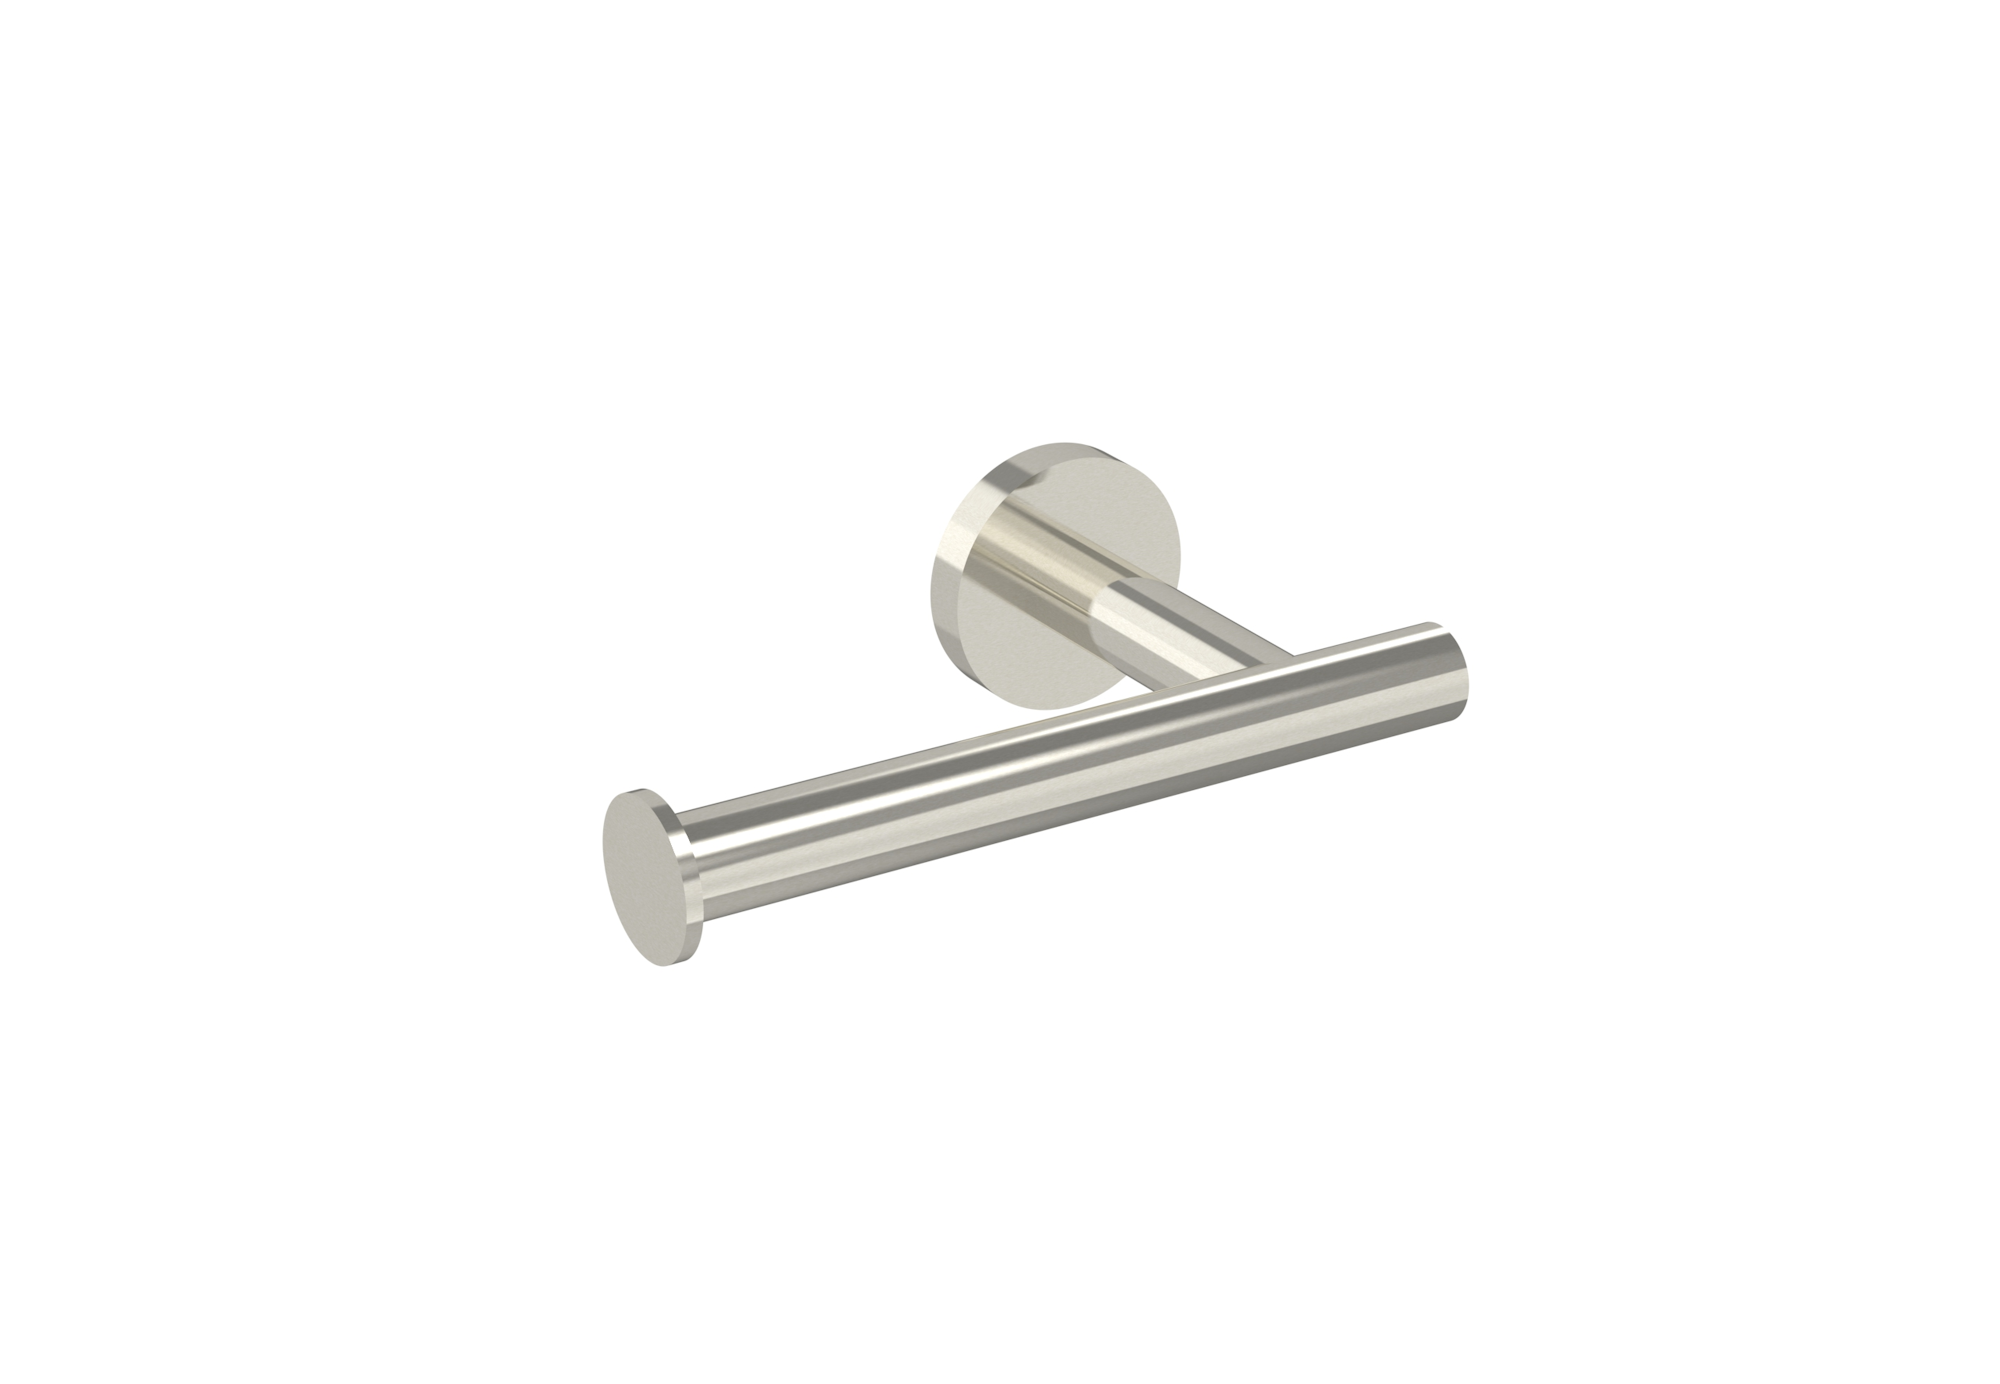 COS toilet roll holder - Brushed Nickel